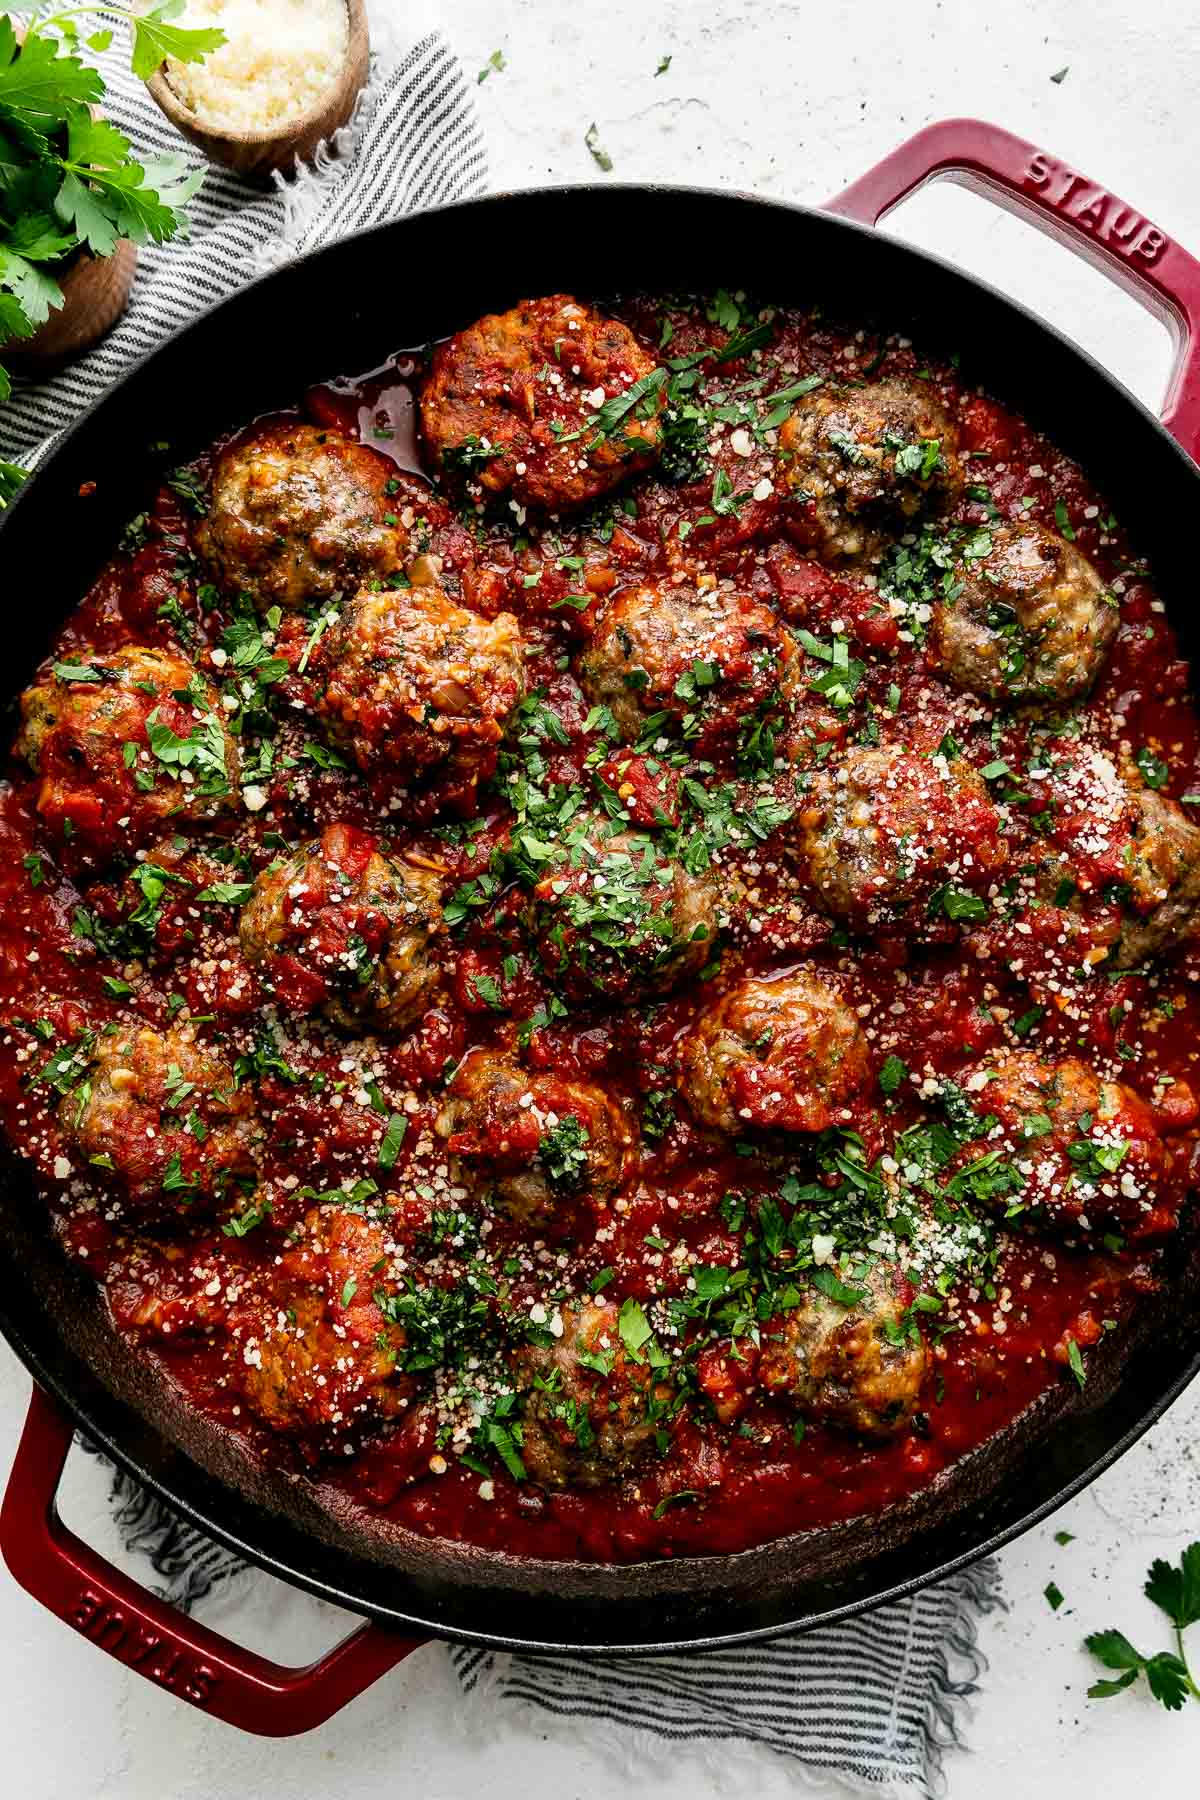 Best-Ever Meatballs Italian Ricotta Meatballs with Simple Tomato Sauce picture